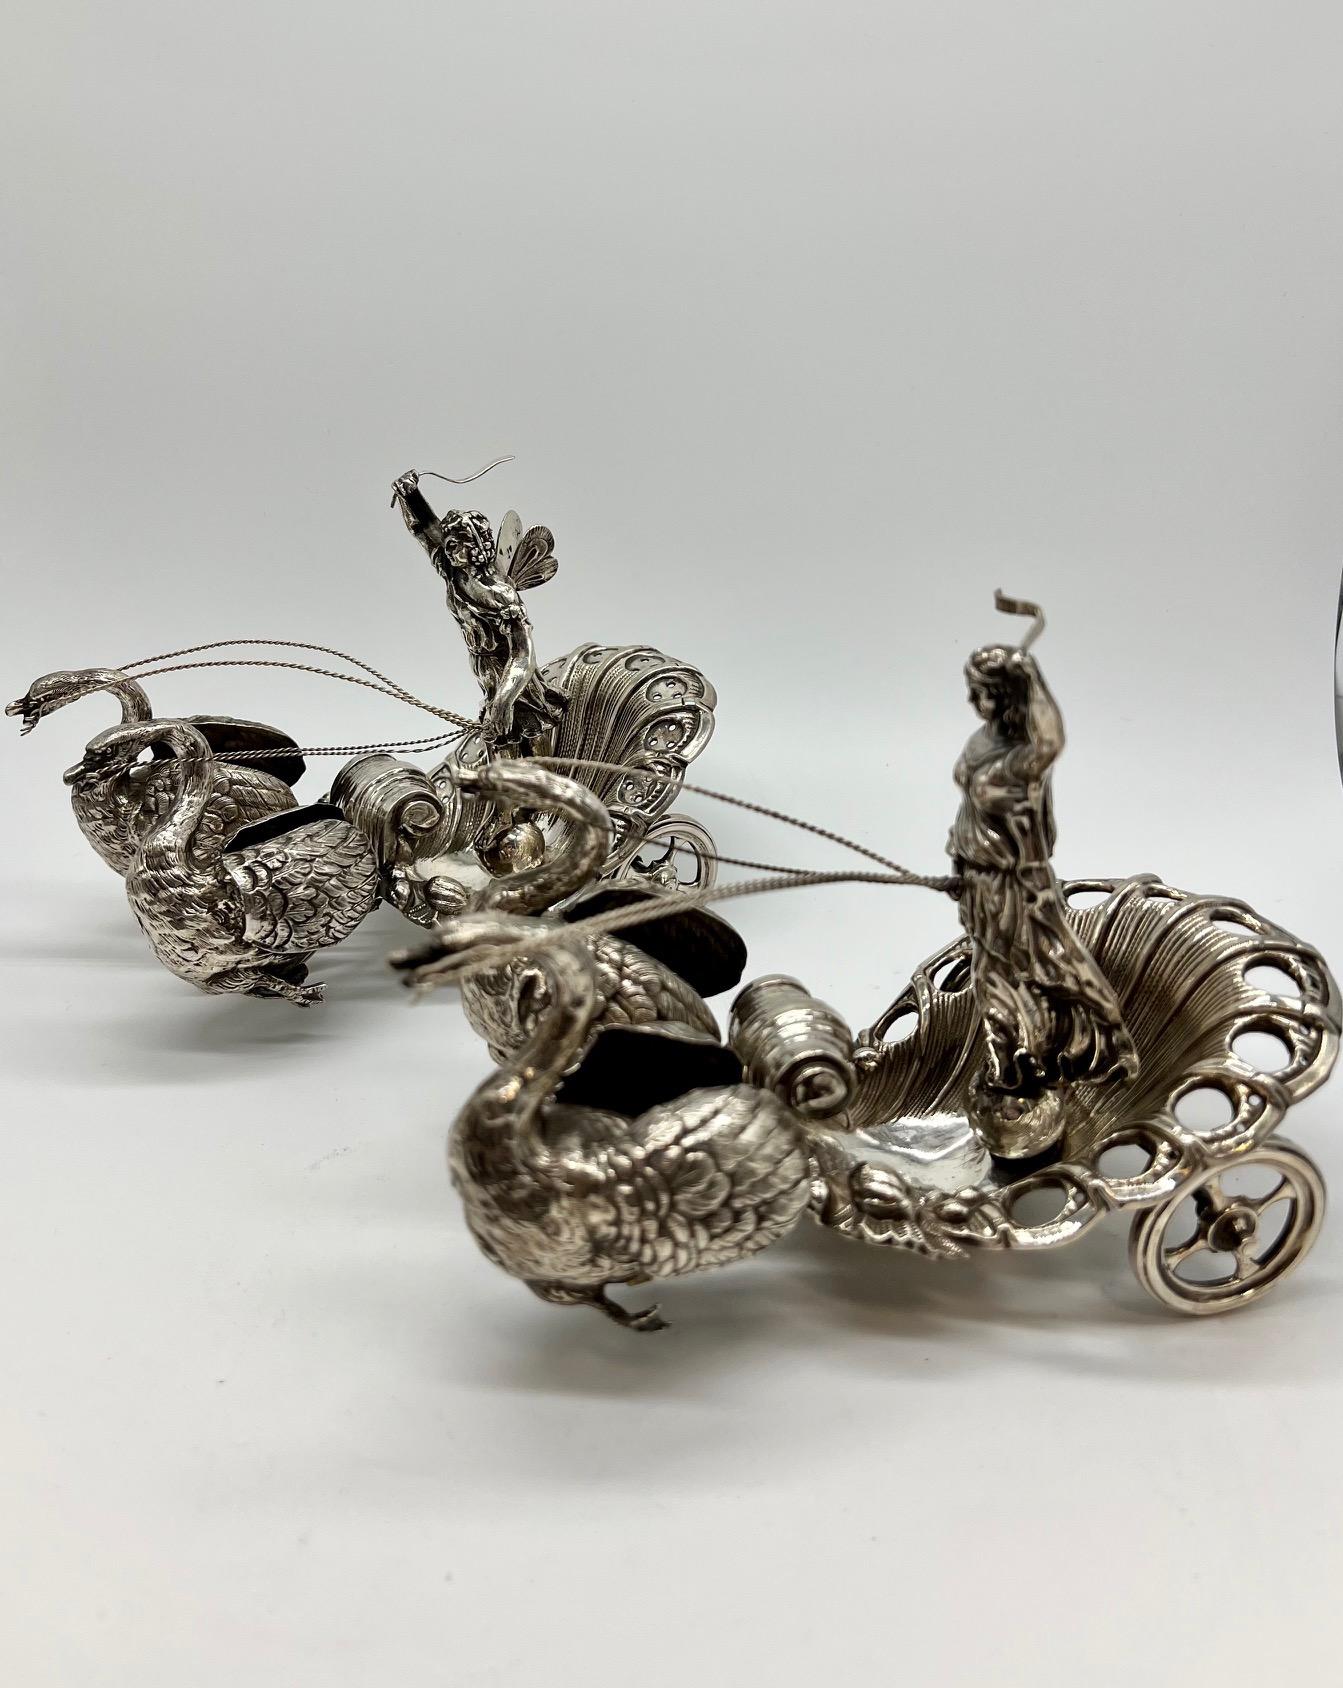 Pair of 20th century German silver swan drawn chariot with robed driver stamped, marked 